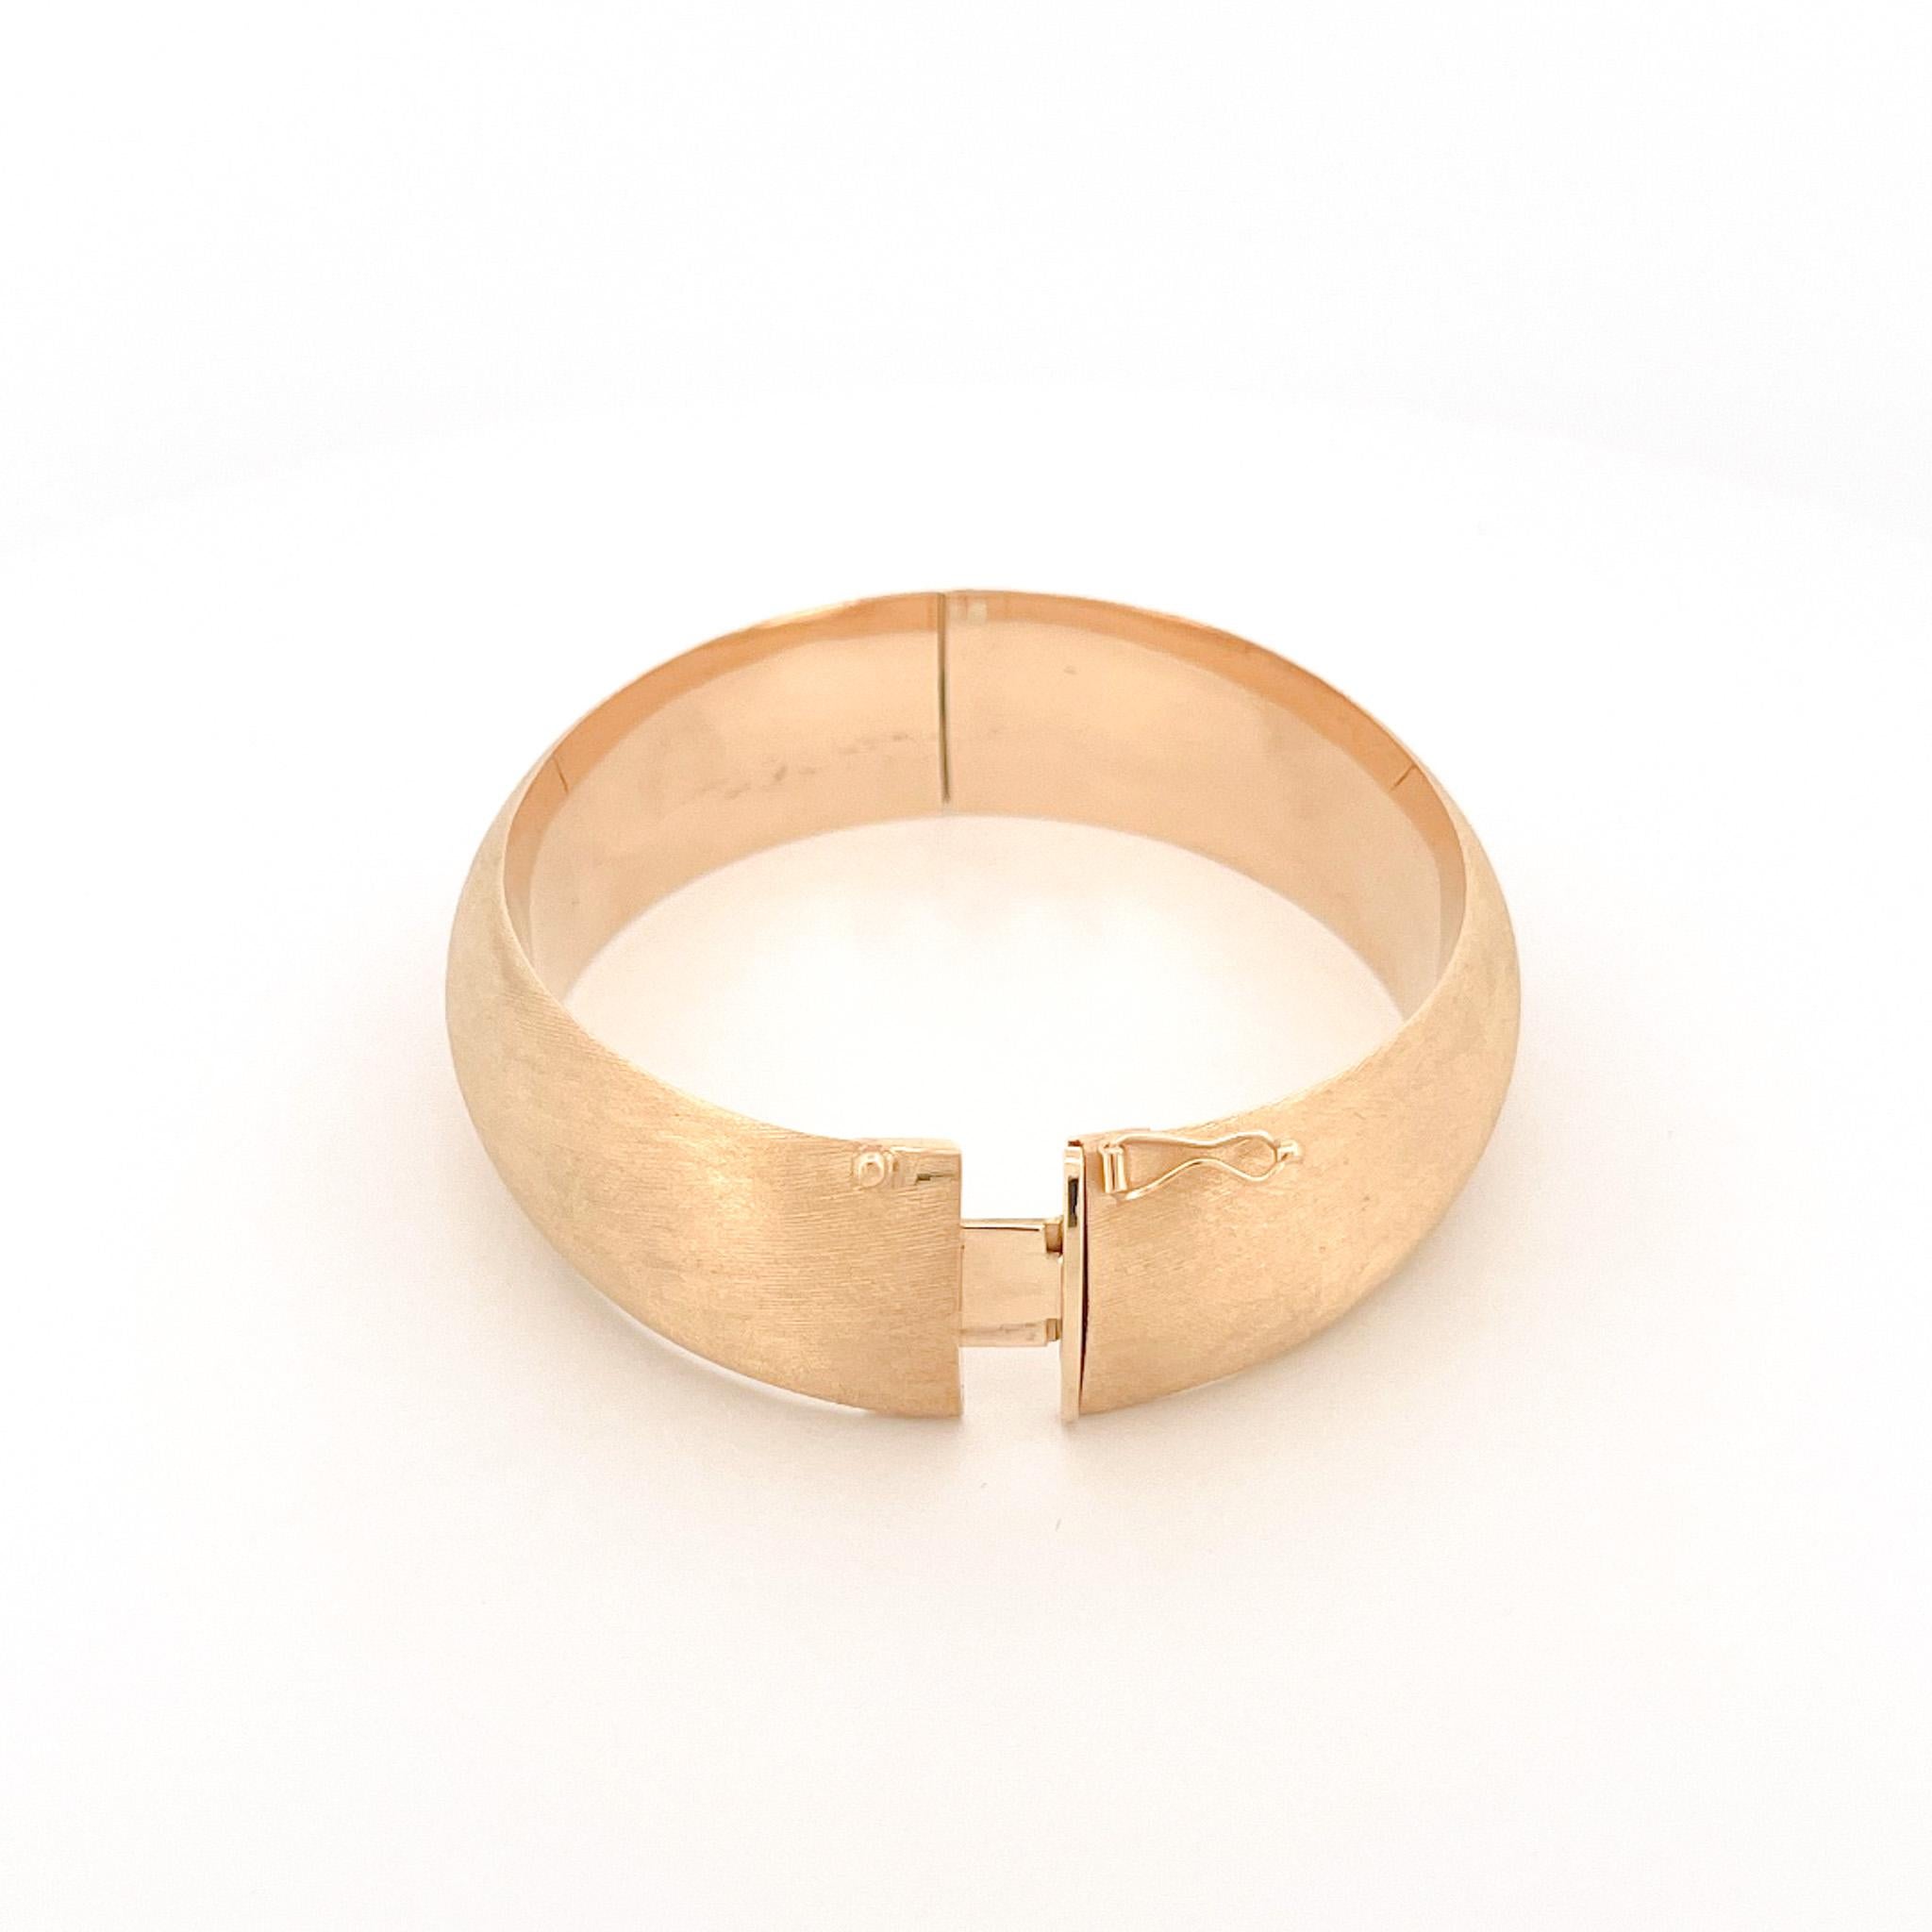 From the Eiseman Estate Jewelry Collection, circa 1980s, 18 karat yellow gold thick bangle featuring a Florentine finish. This bangle measures 5mm wide and fits a wrist size 7 to 7.5 inches.